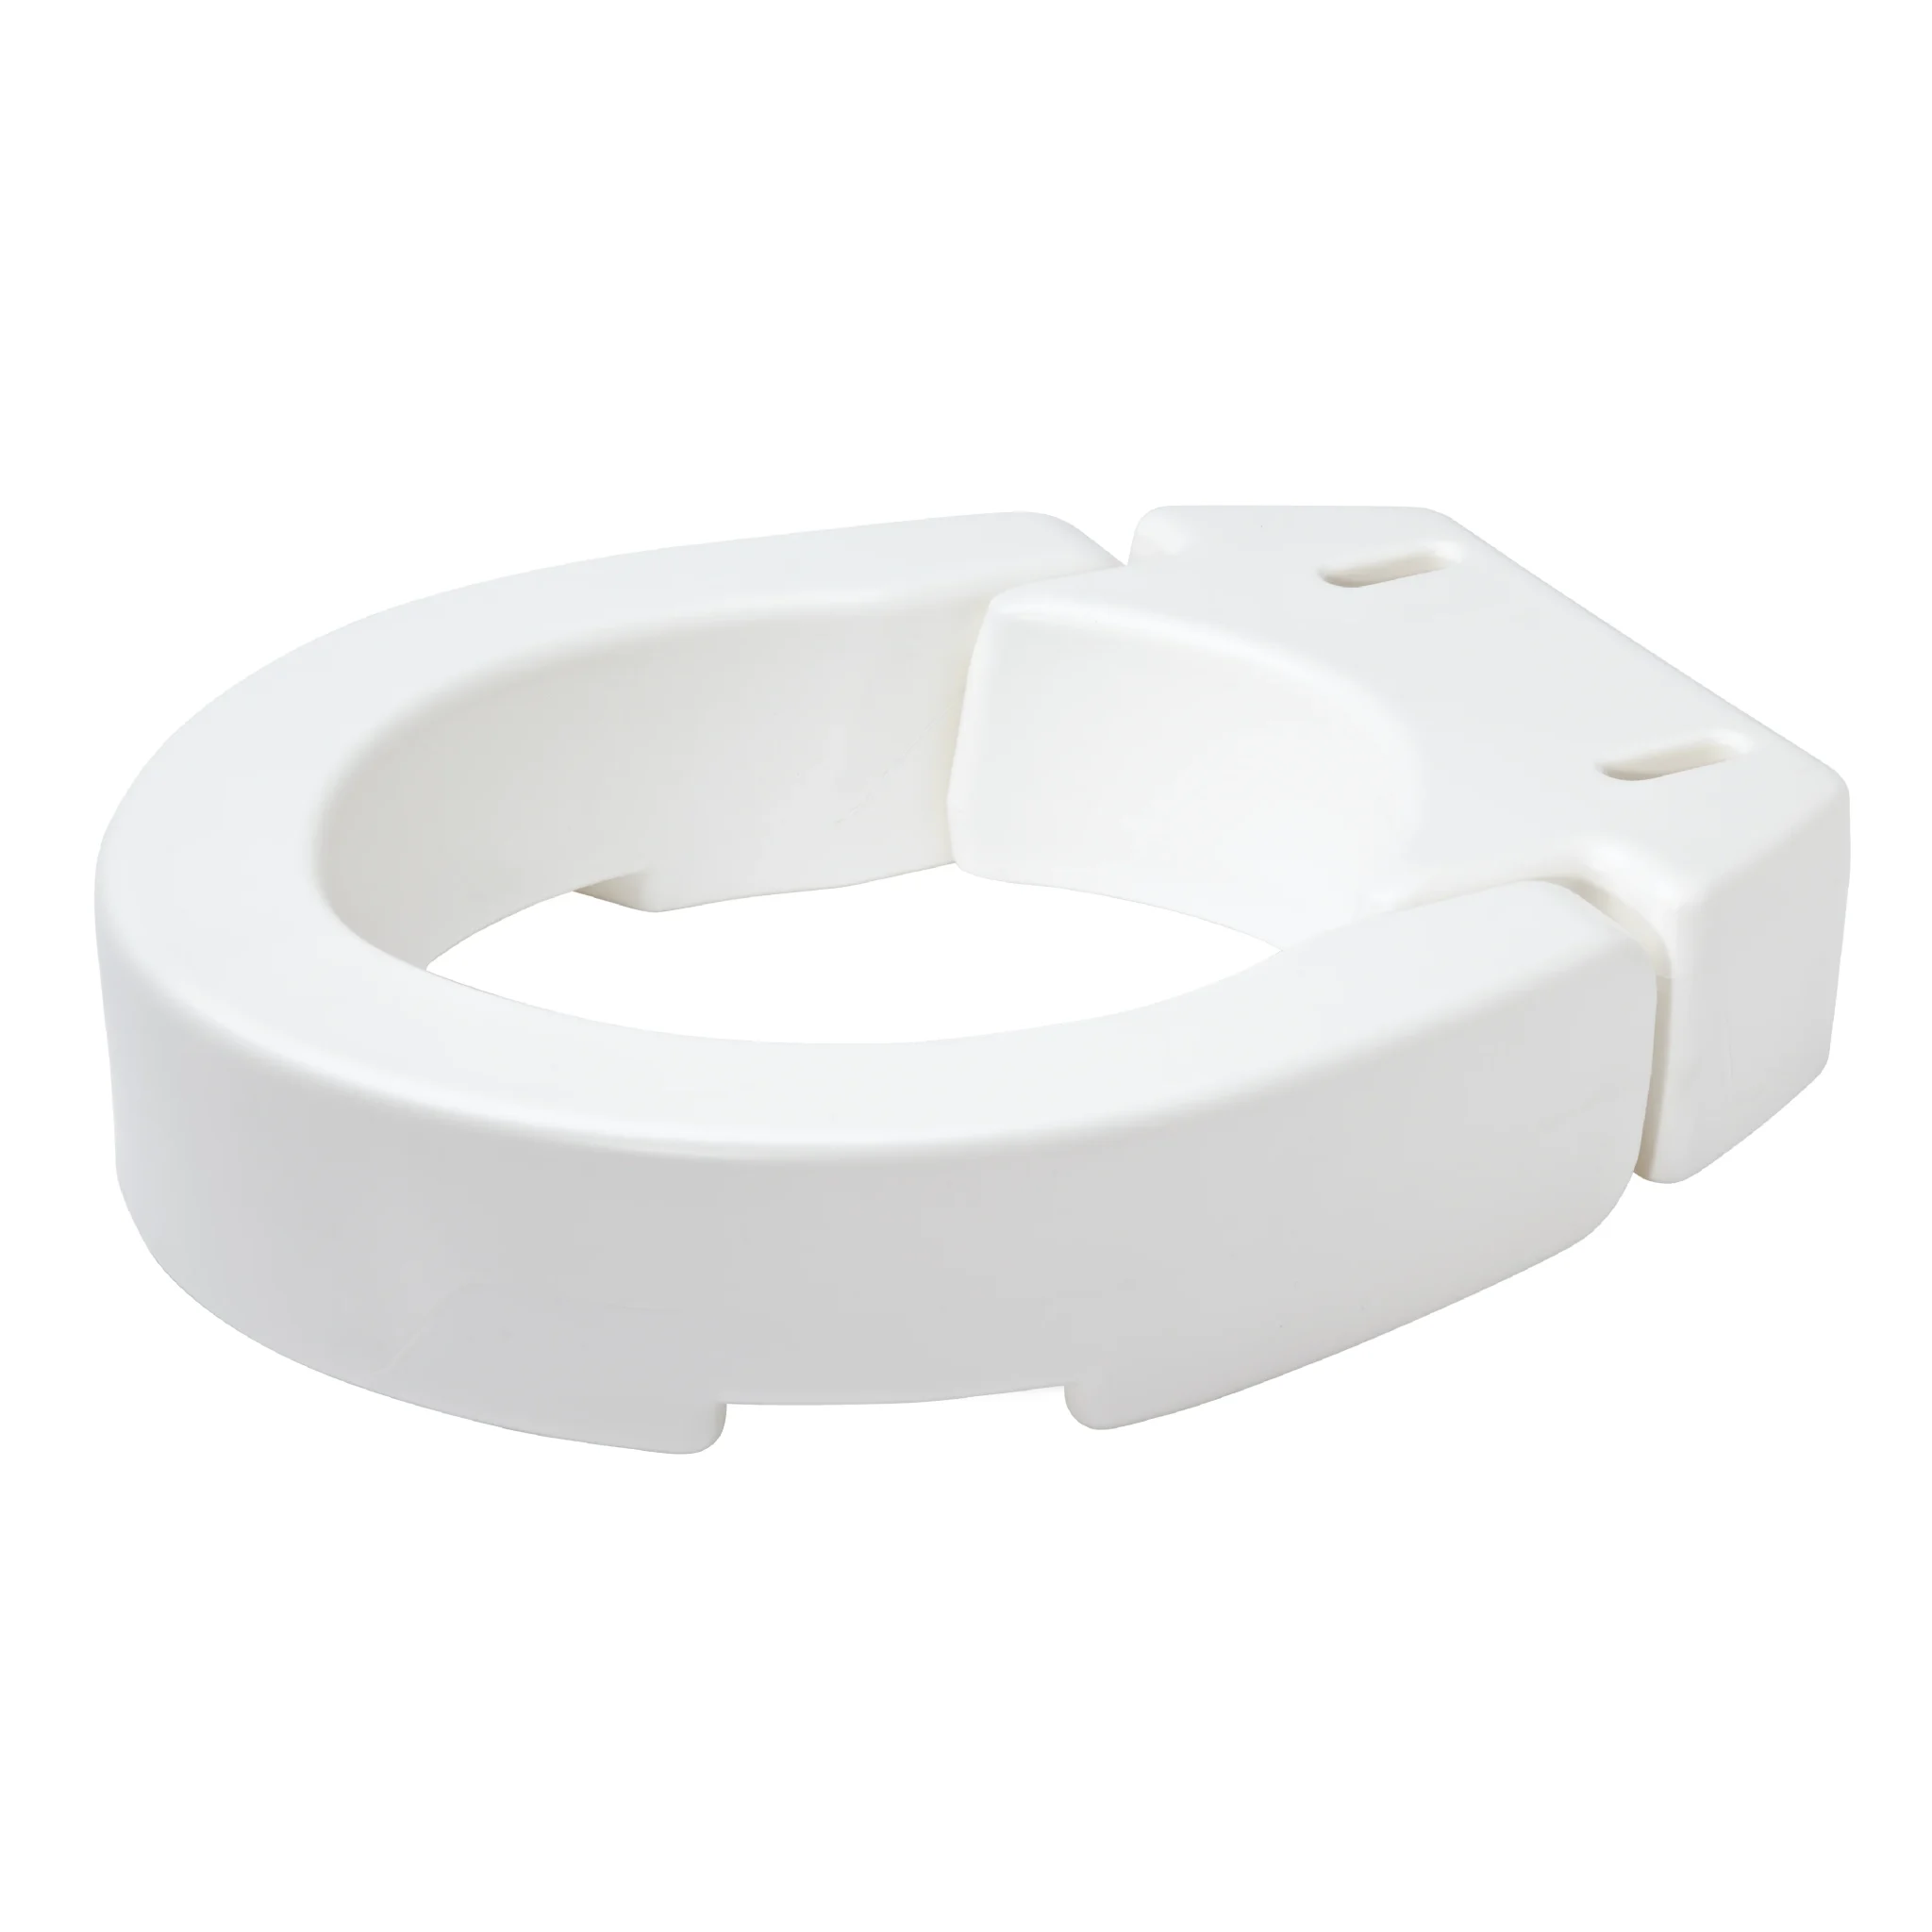 Carex Hinged Toilet Seat Riser – (Standard and Elongated)